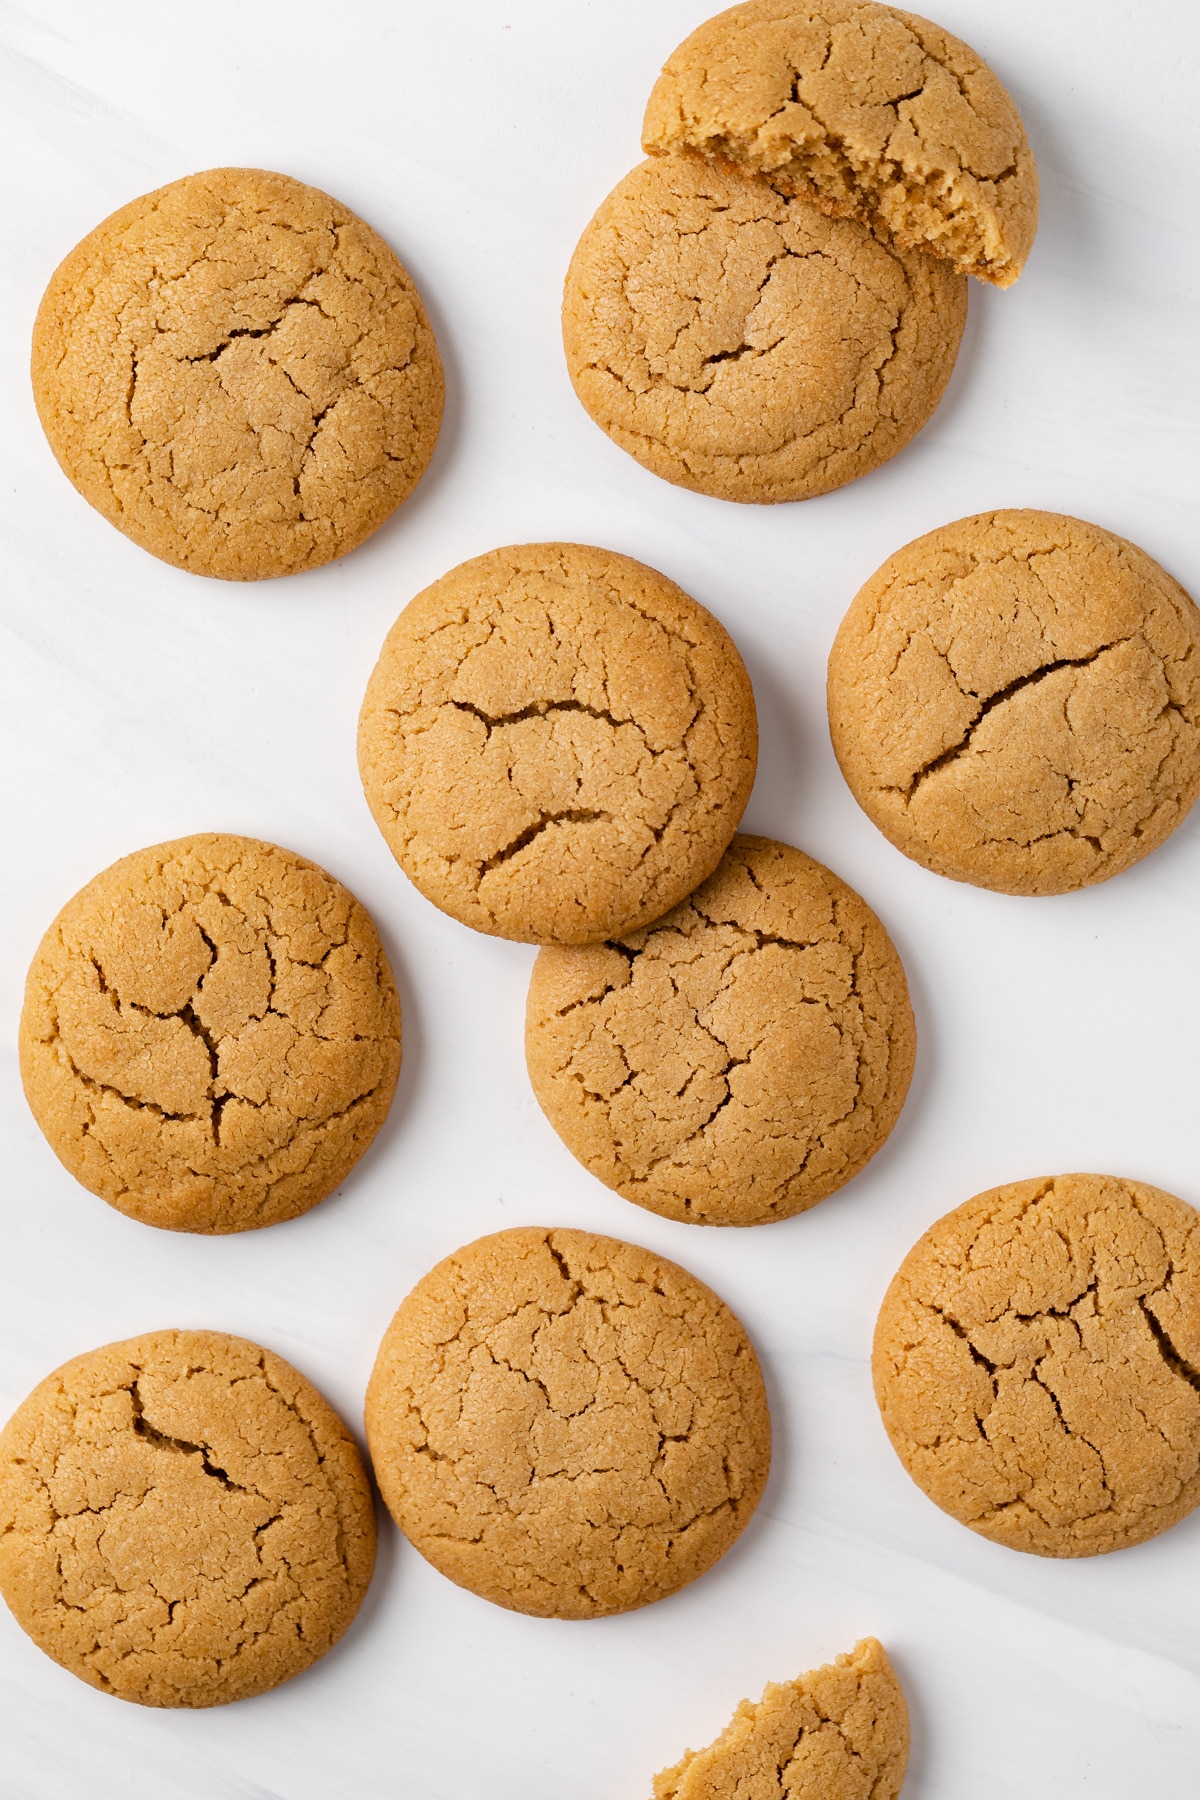 peanut butter cookies scattered on a white table top